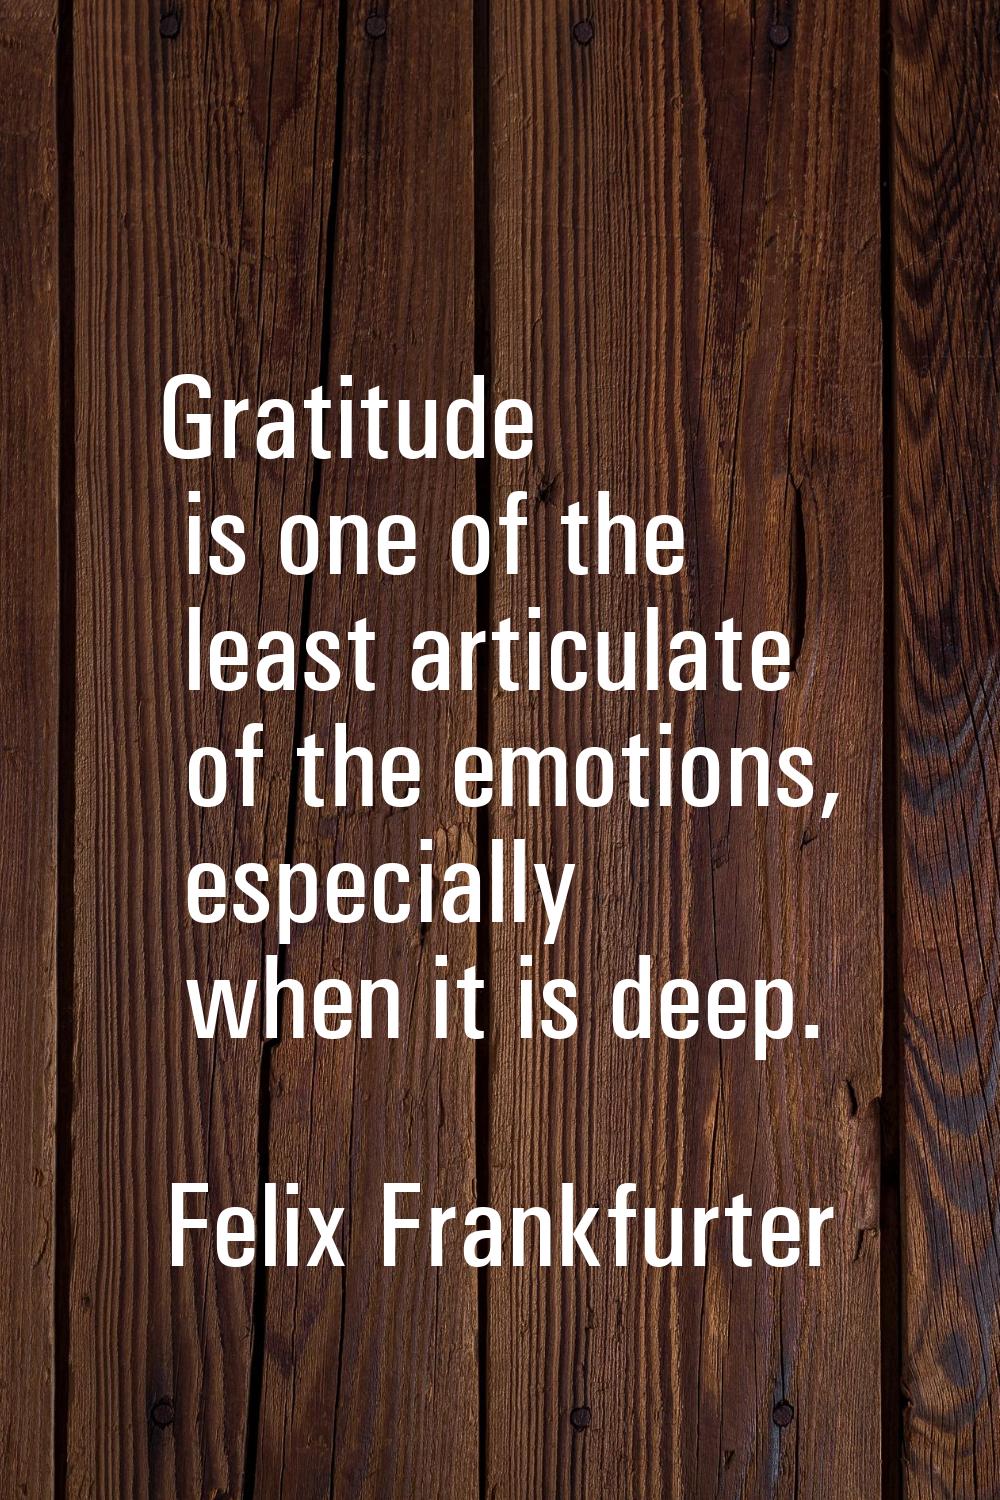 Gratitude is one of the least articulate of the emotions, especially when it is deep.